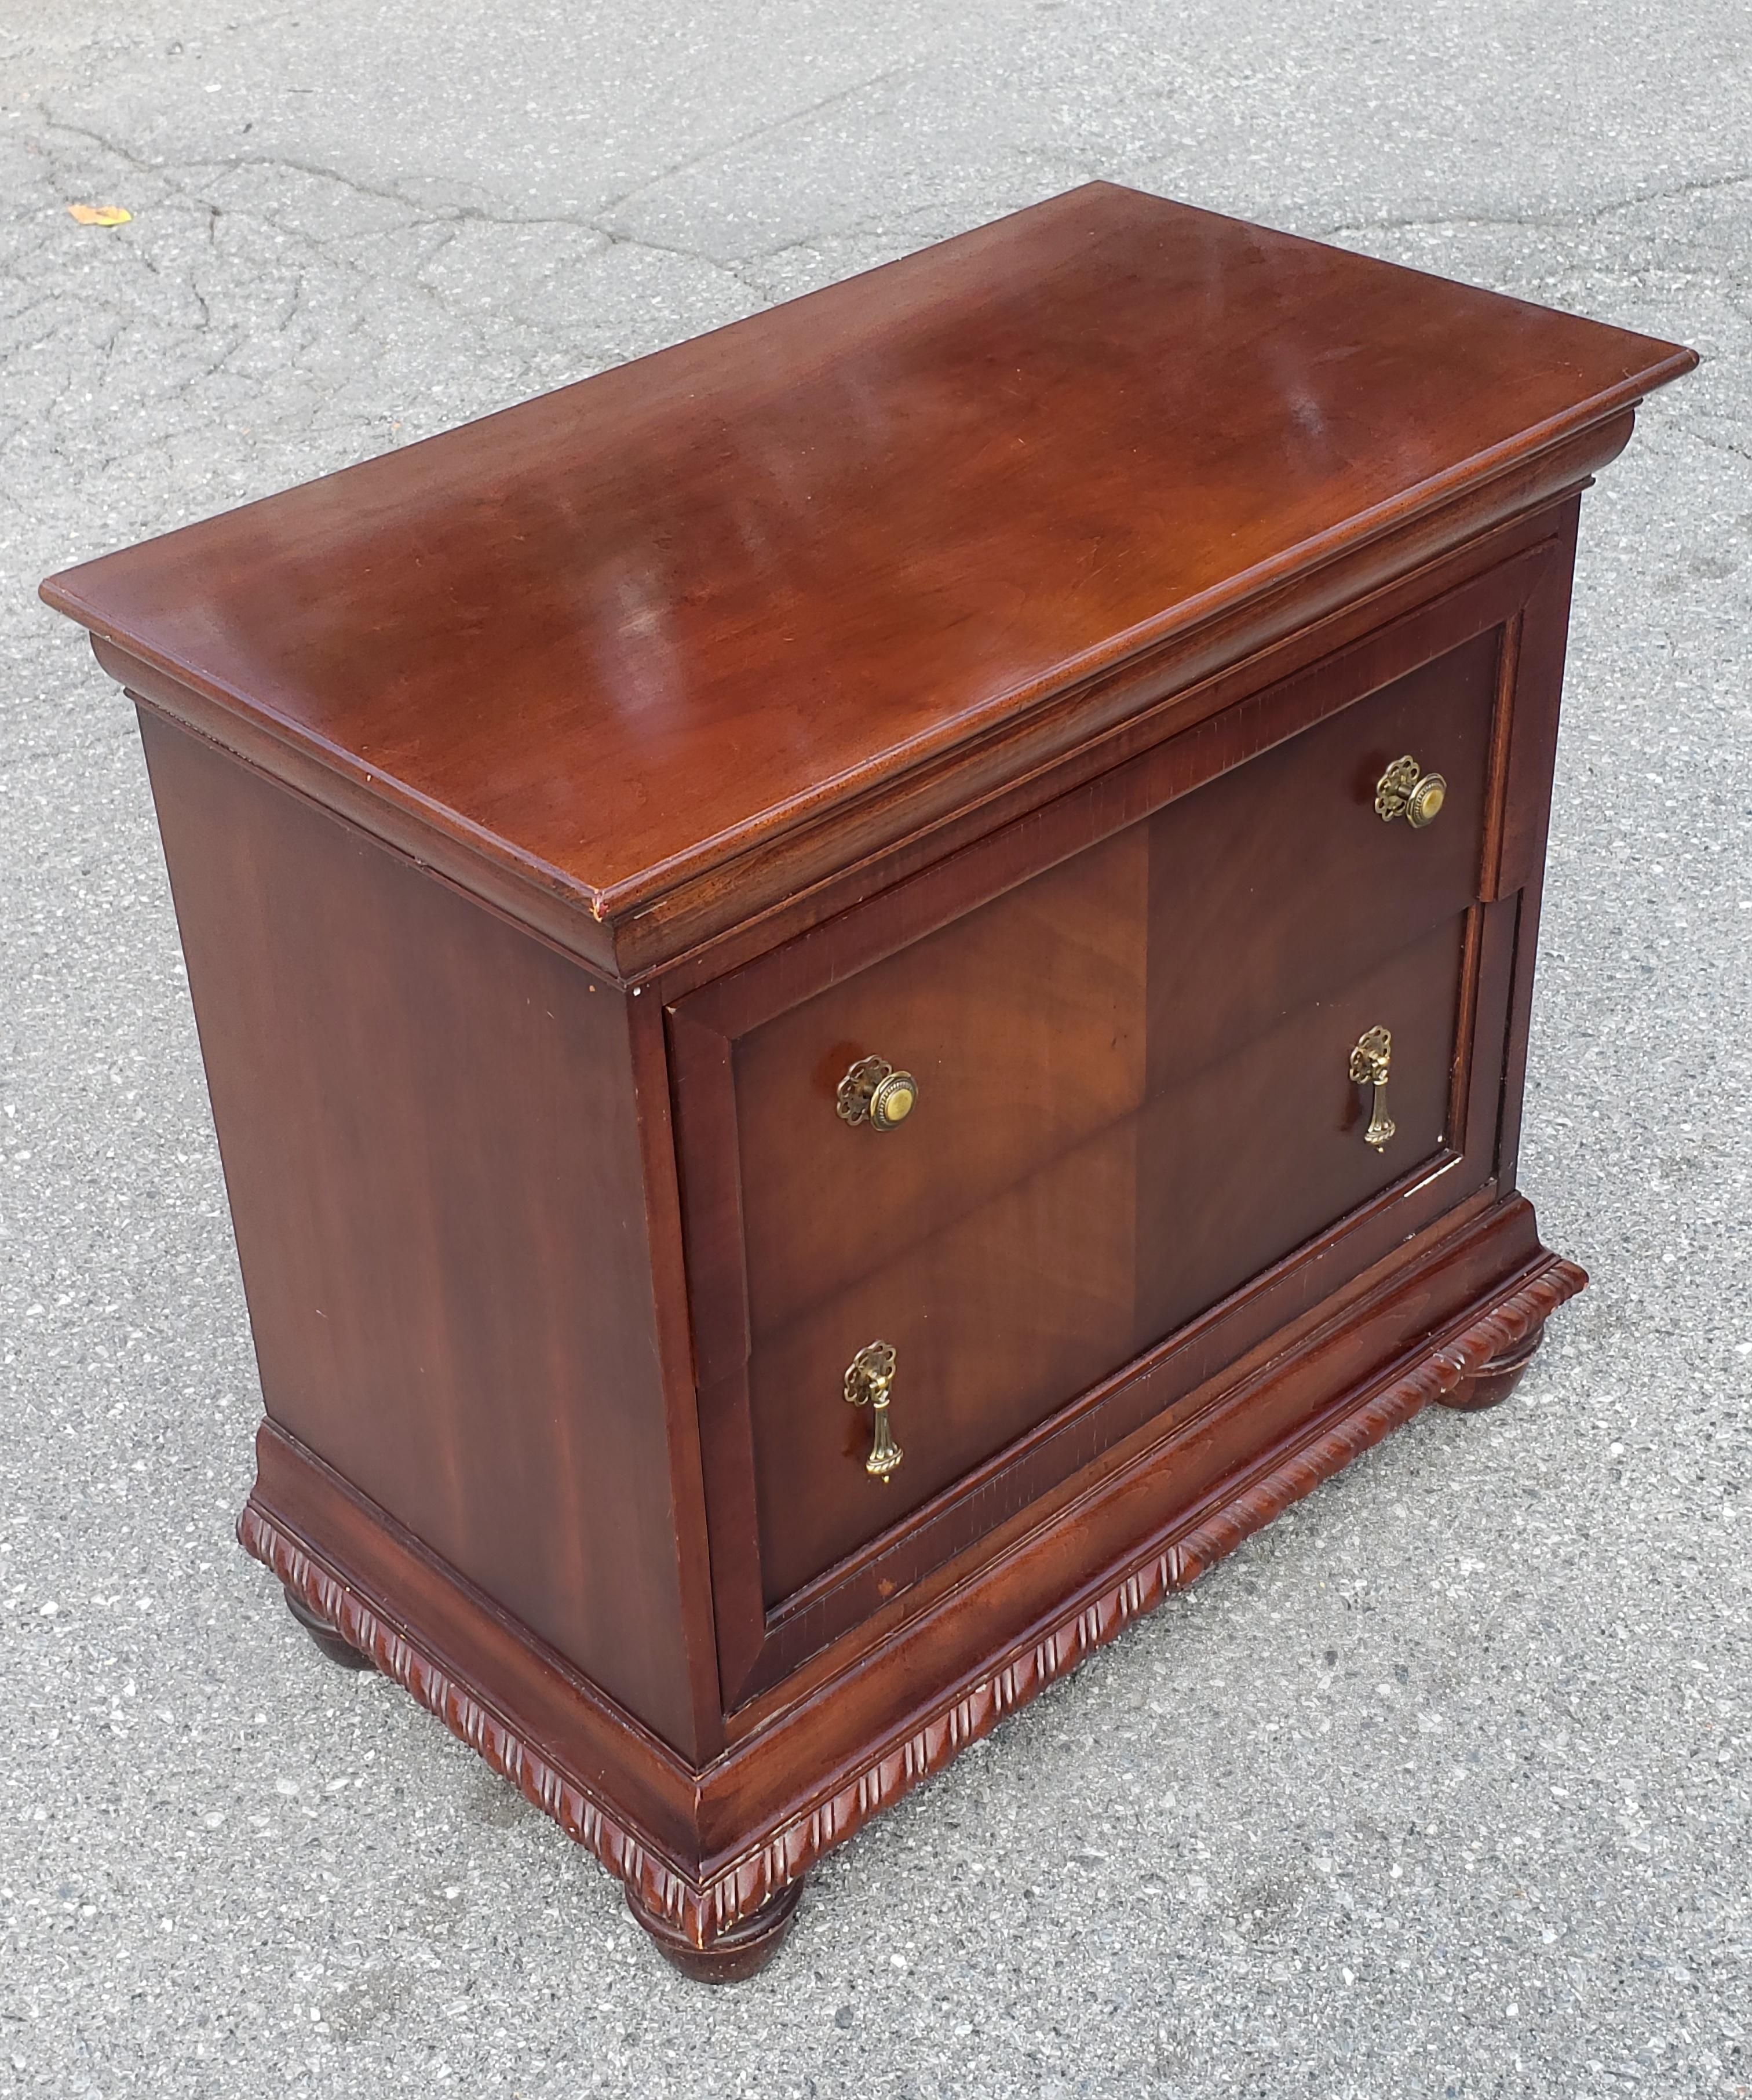 National Mt Airy Bookmatched Mahogany Bedside Chest of Drawers / Nighstand In Good Condition For Sale In Germantown, MD